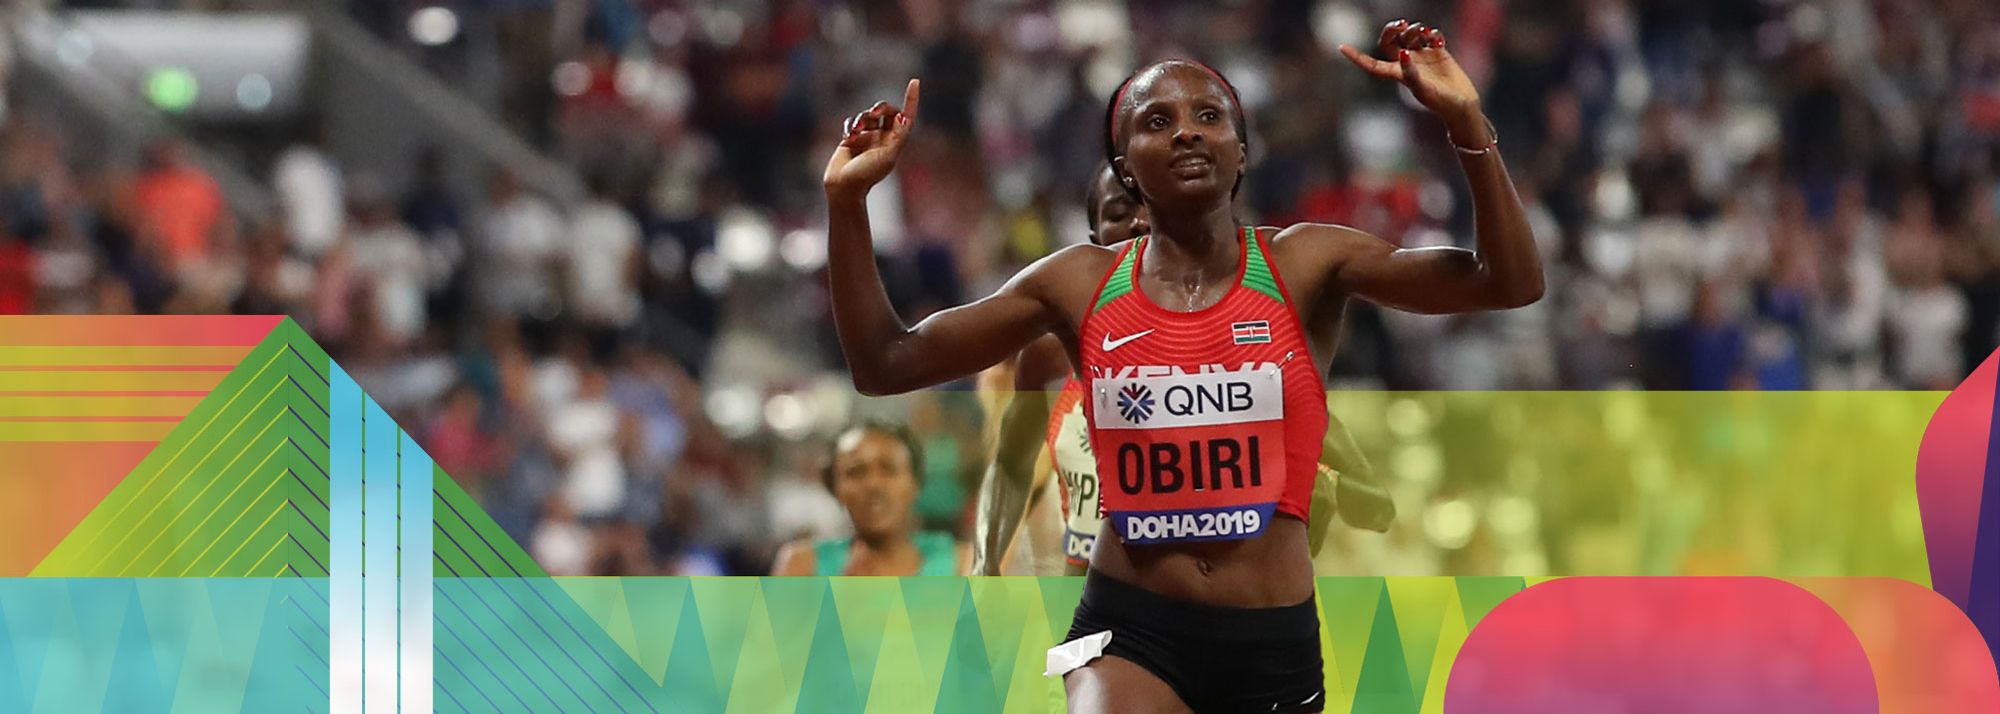 Hellen Obiri, Ruth Chepngetich and Timothy Cheruiyot are among the athletes set for Oregon